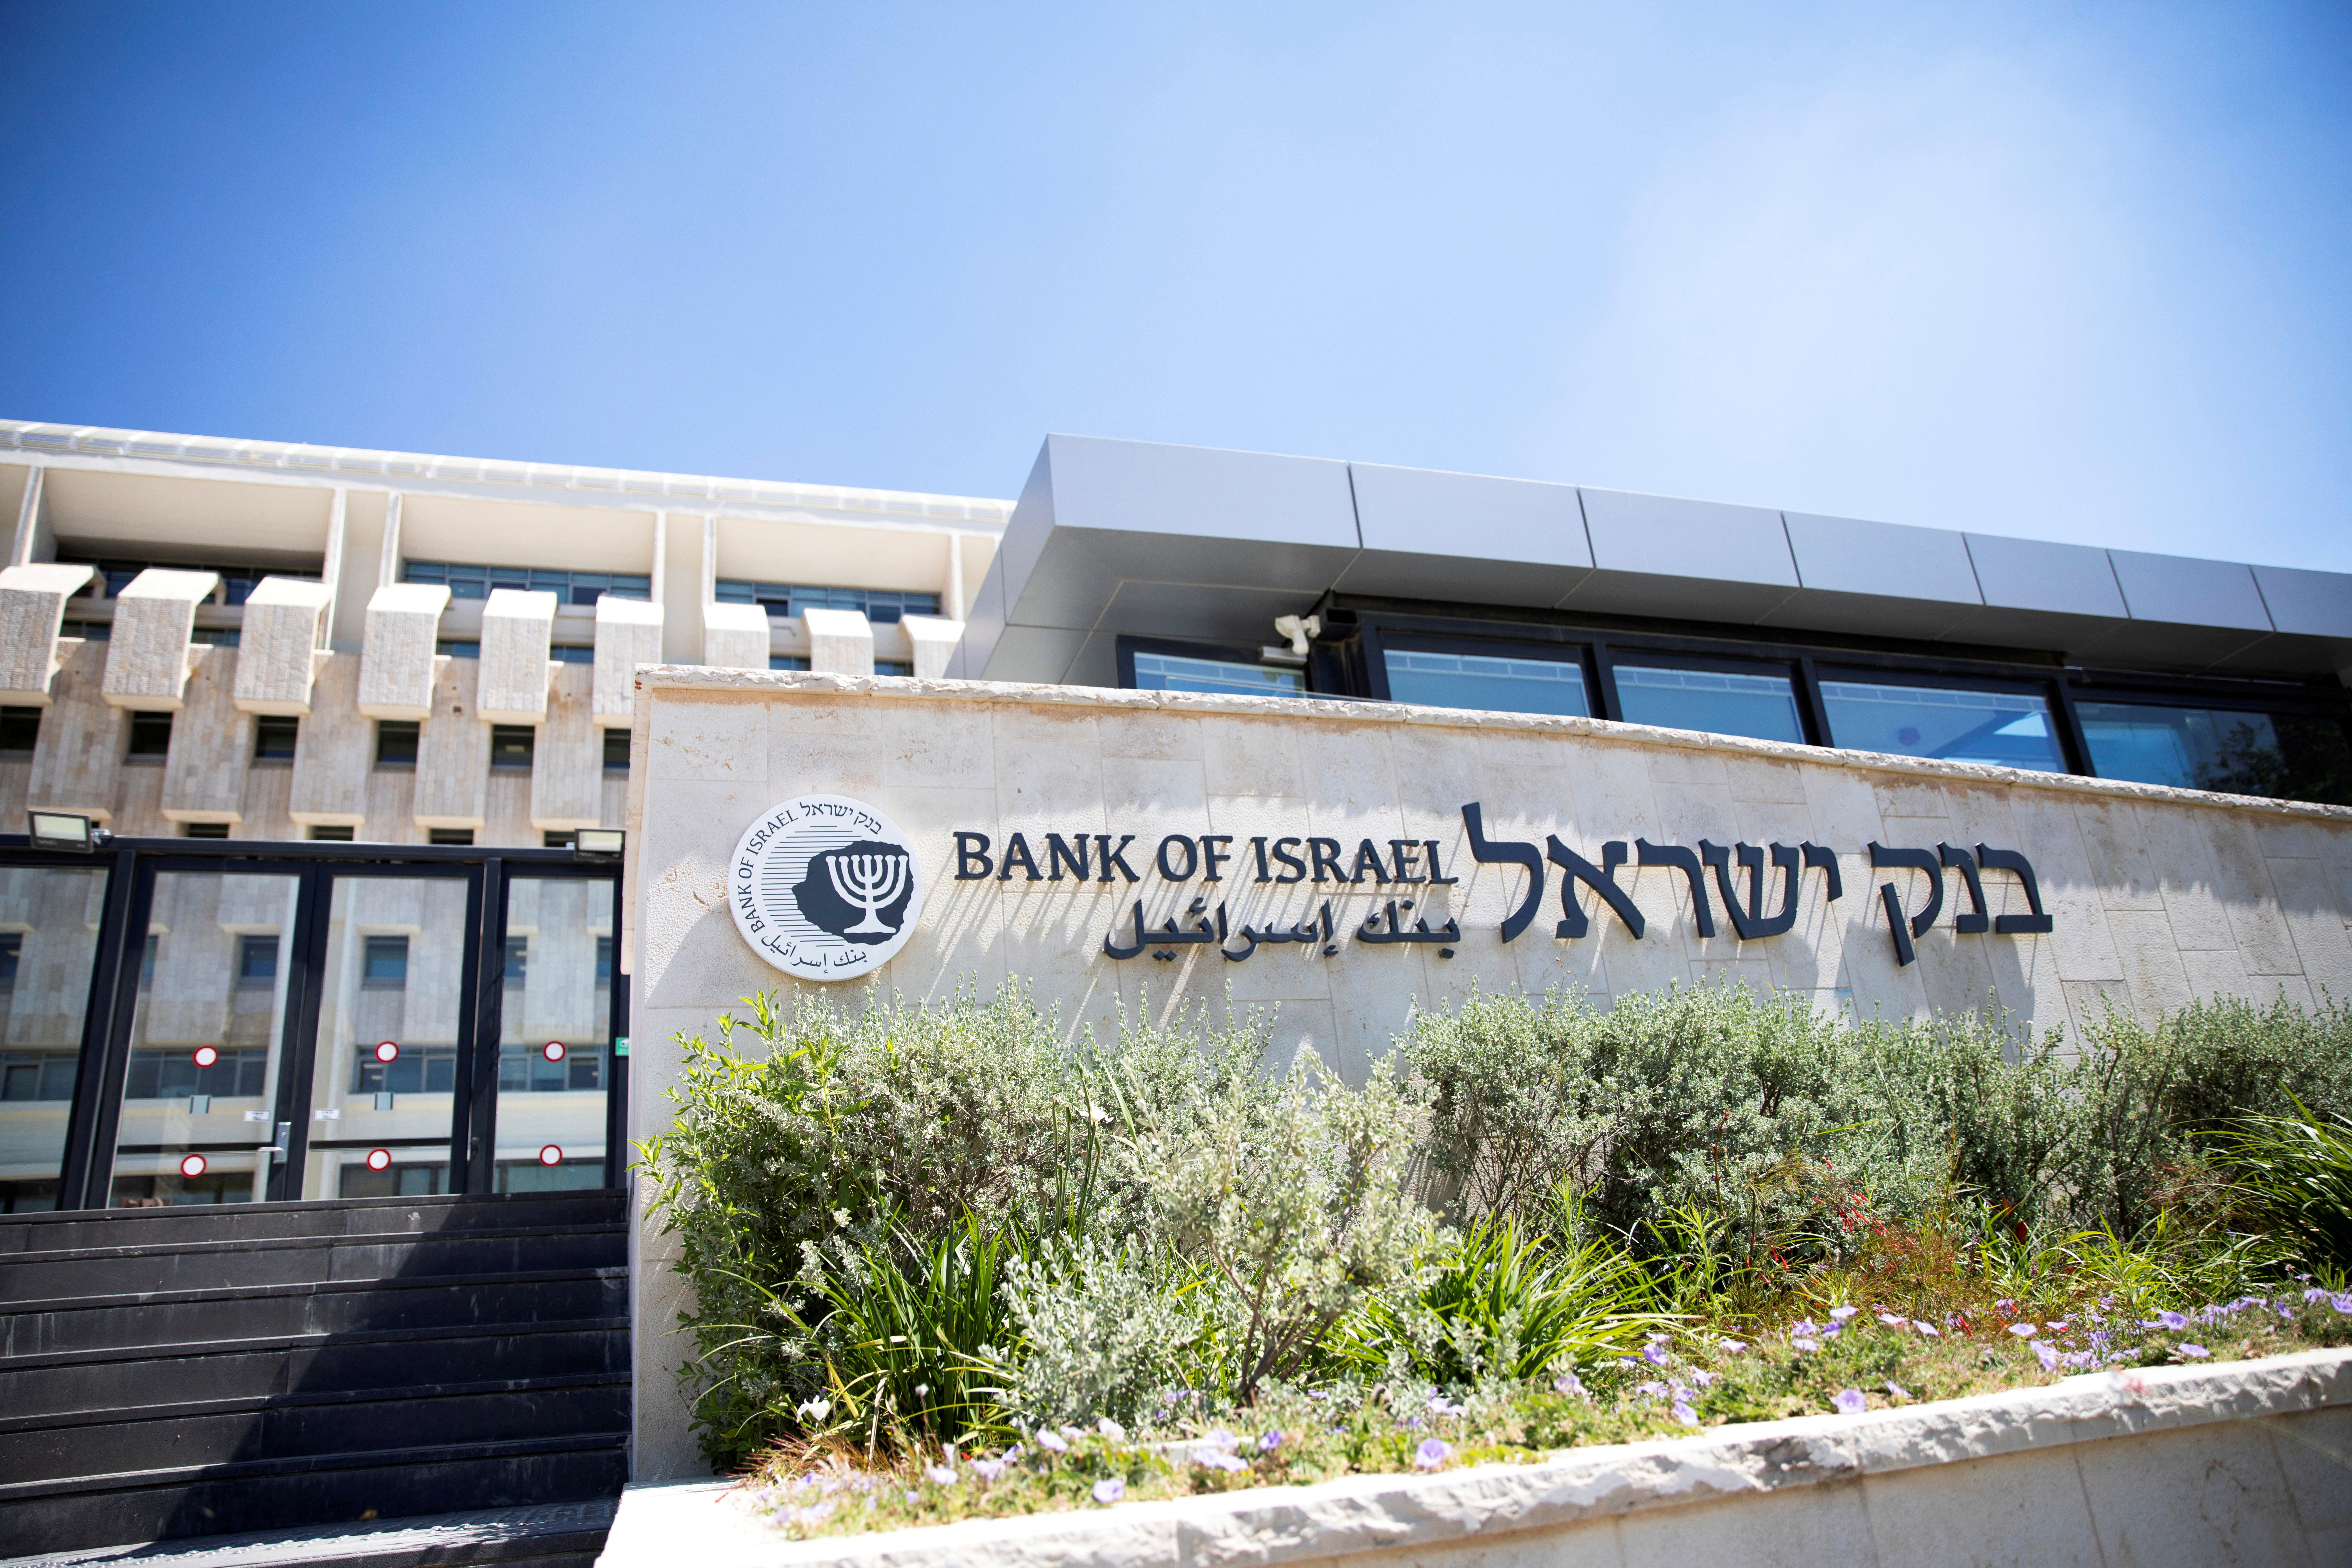 Israel posts 5.3% inflation rate in 2022